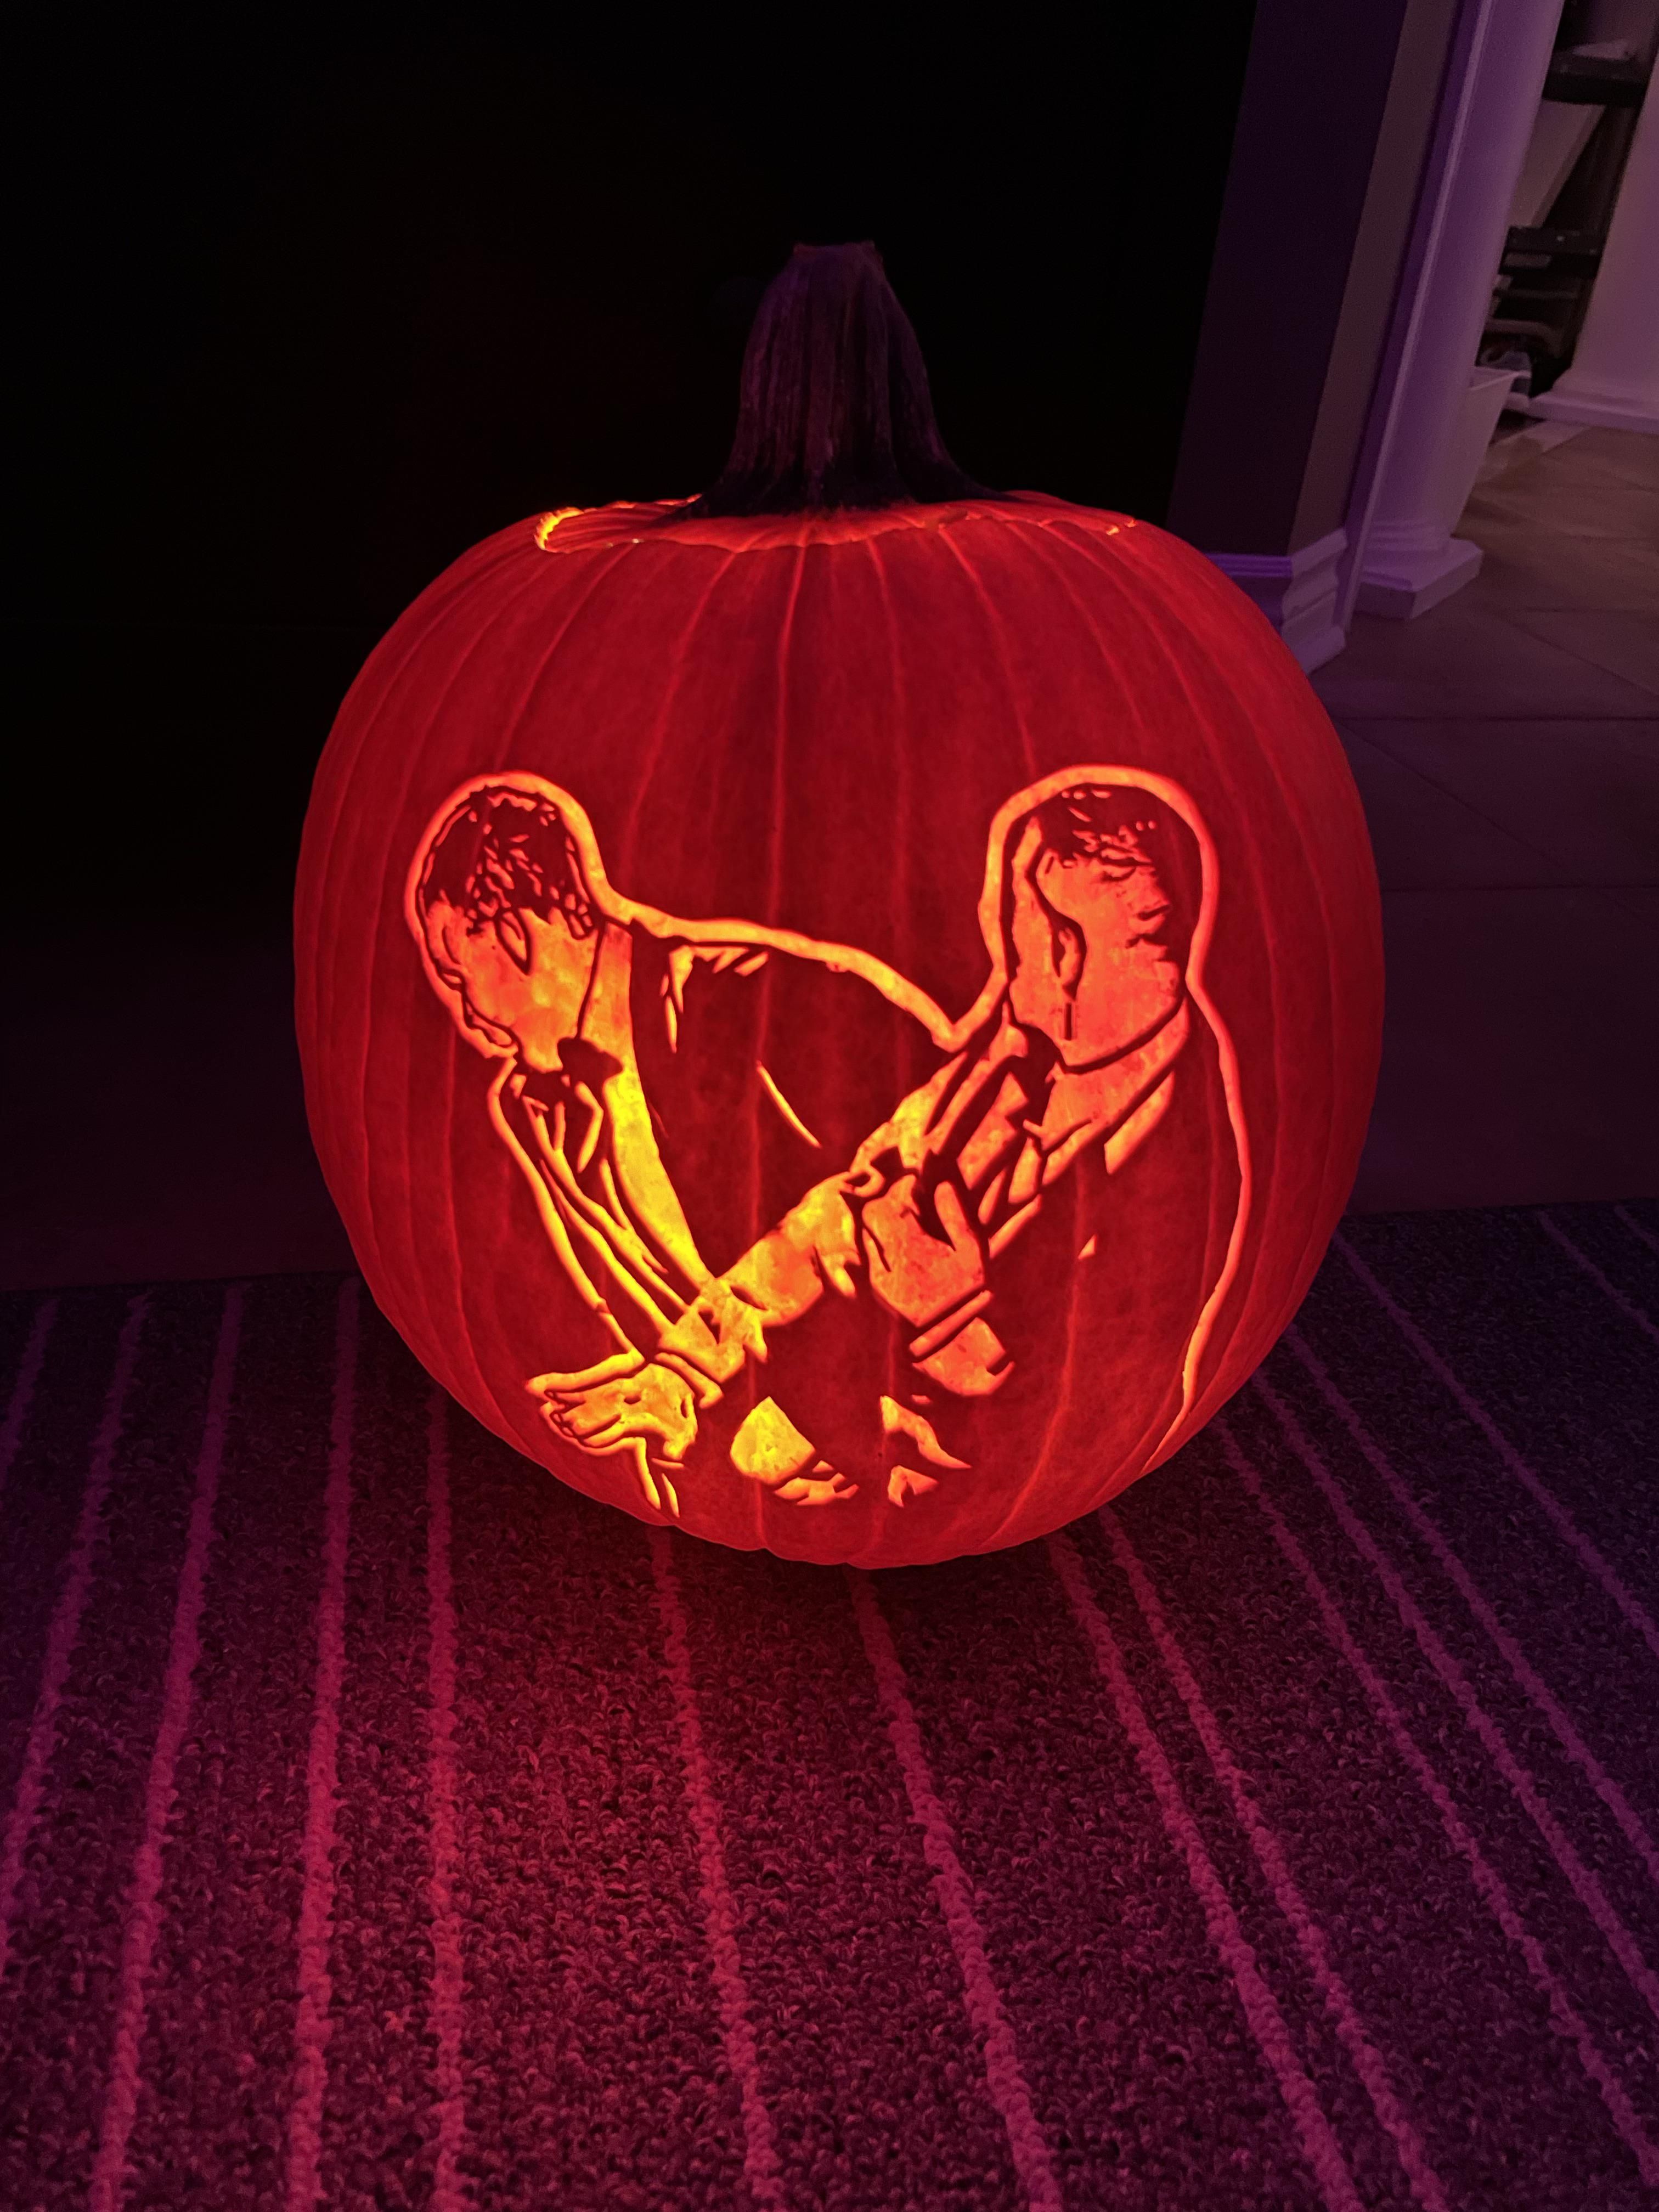 Keep my pumpkin’s name out your f***ing mouth